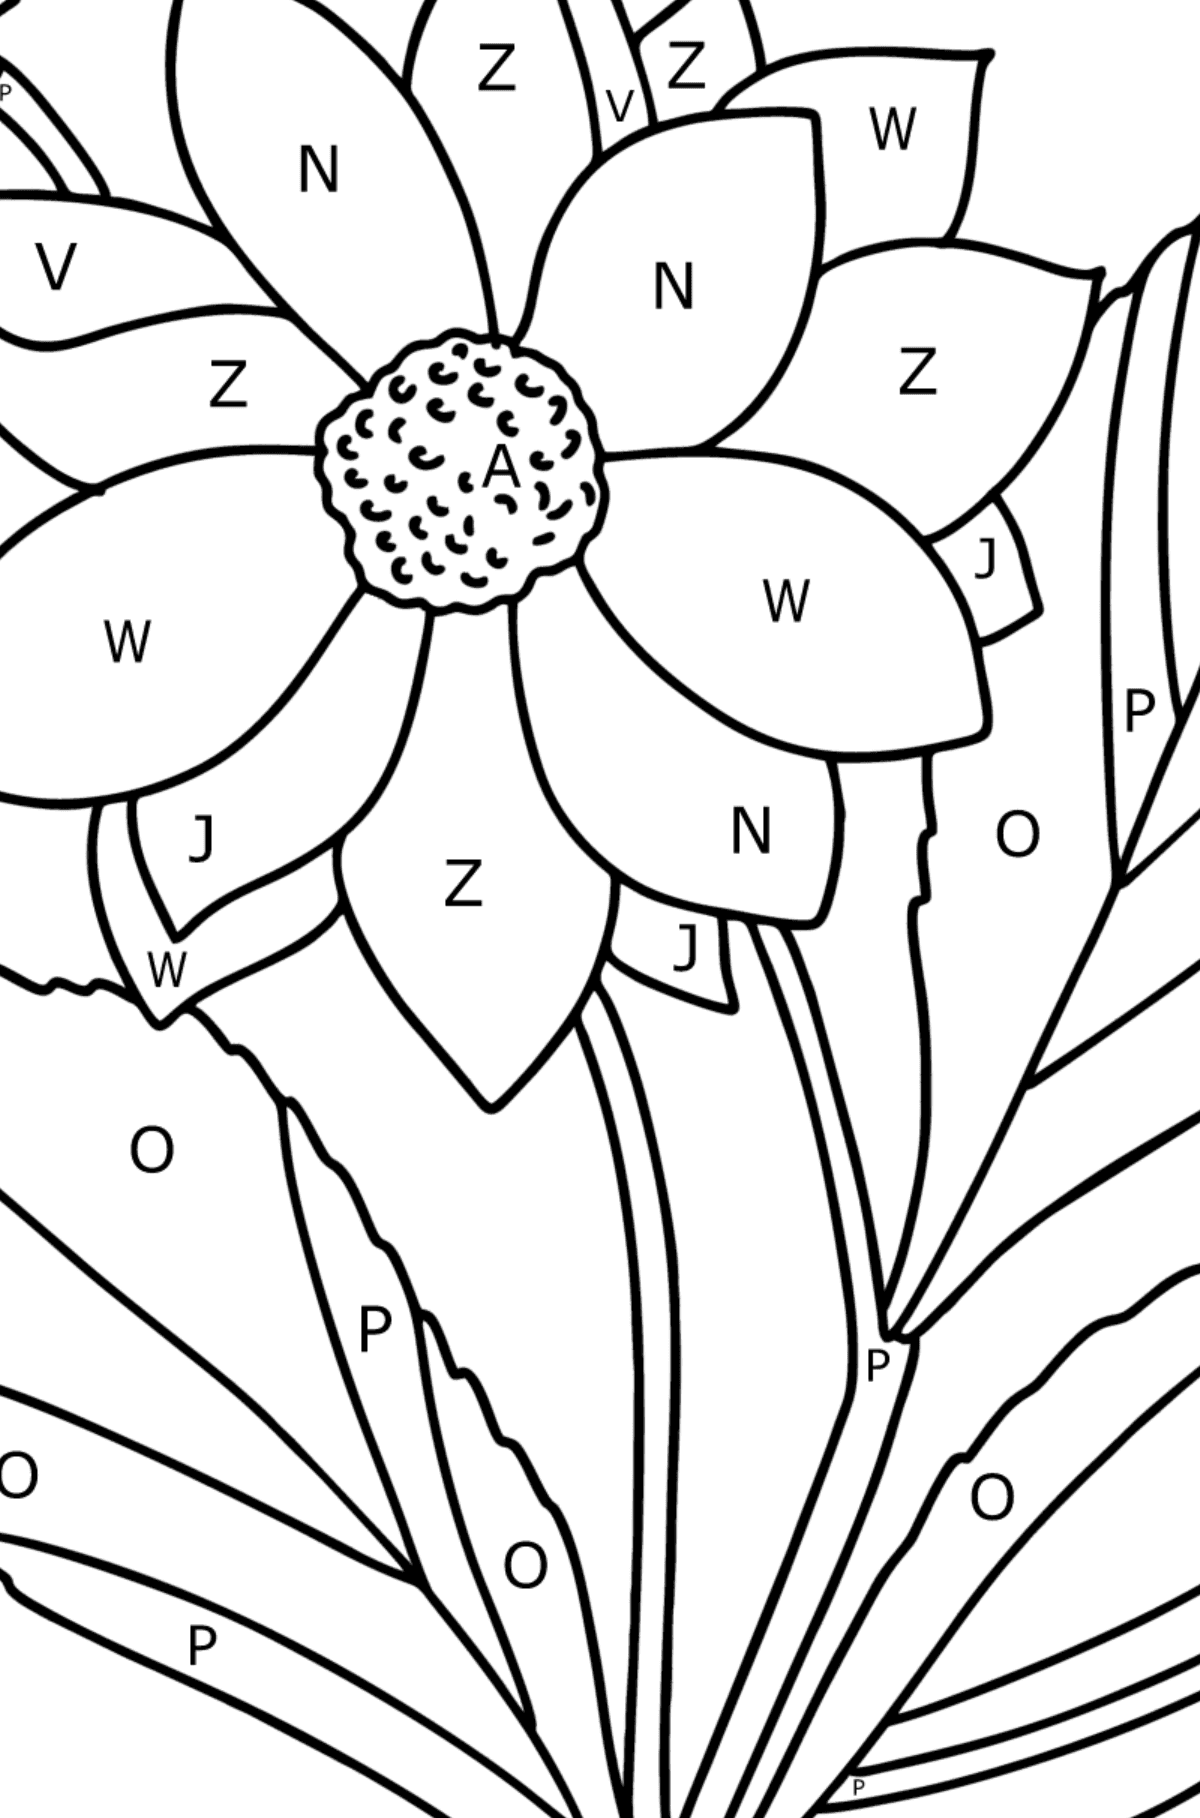 Dahlias coloring page - Coloring by Letters for Kids